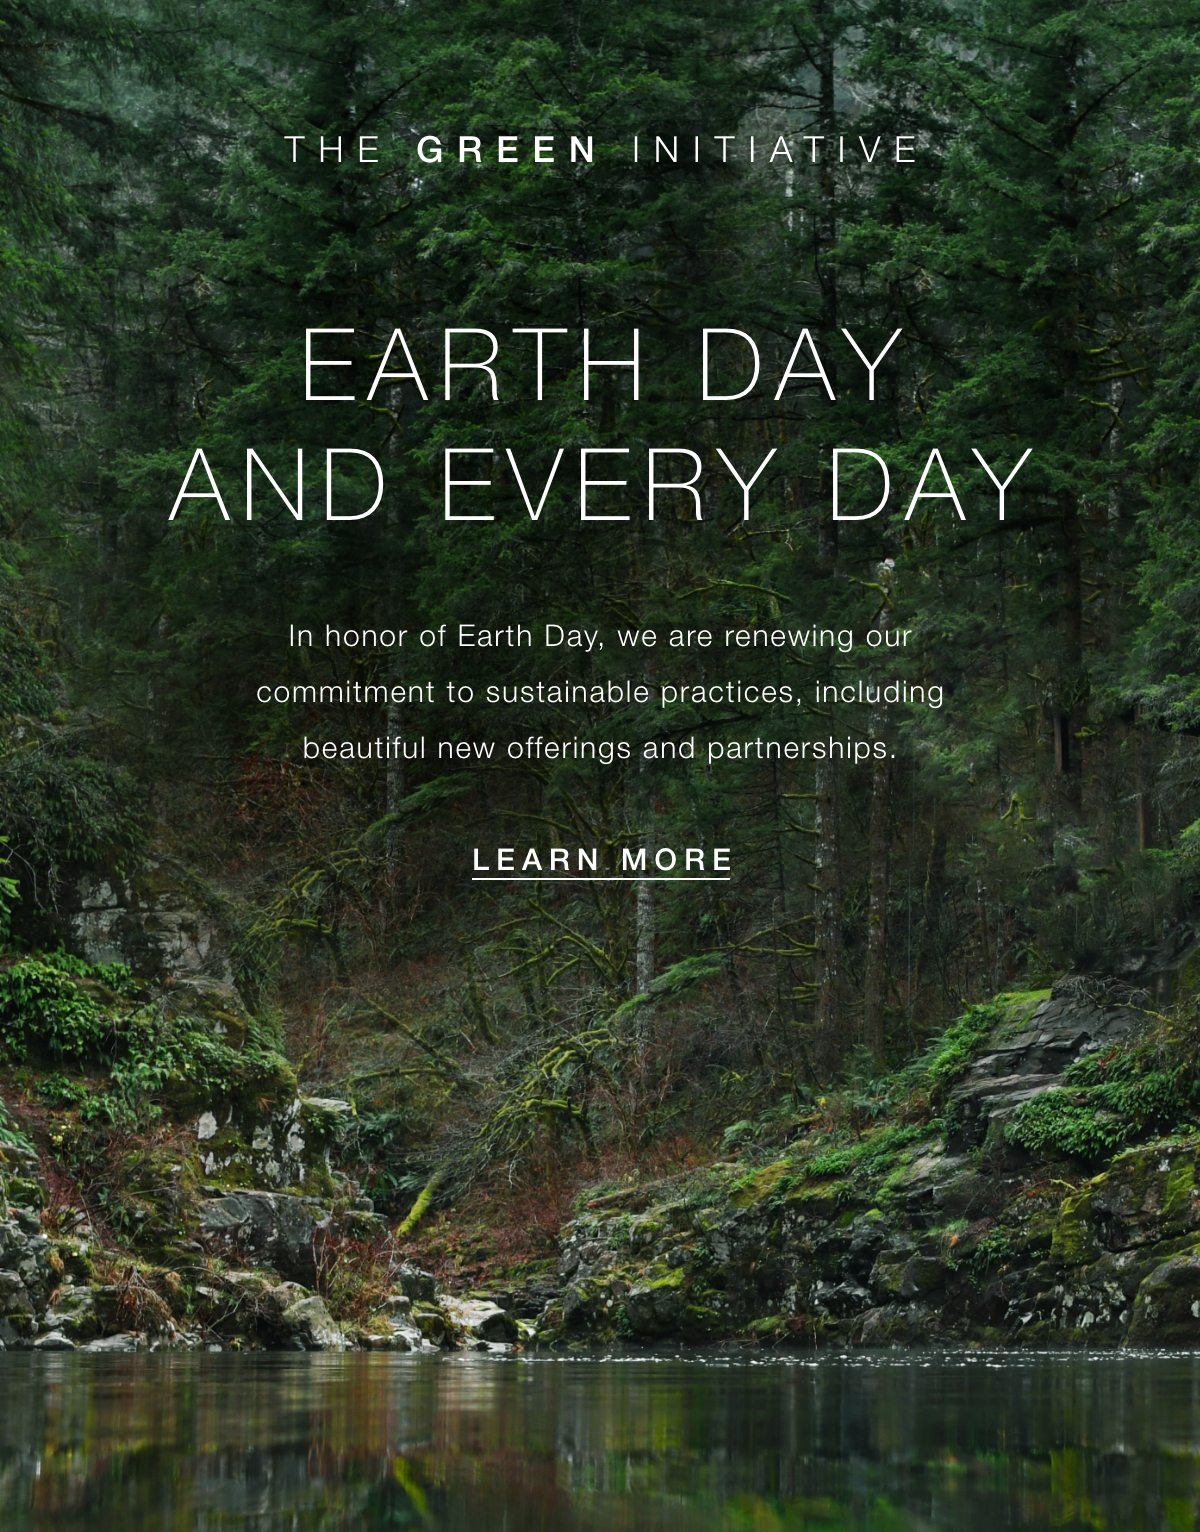 Earth Day and every day